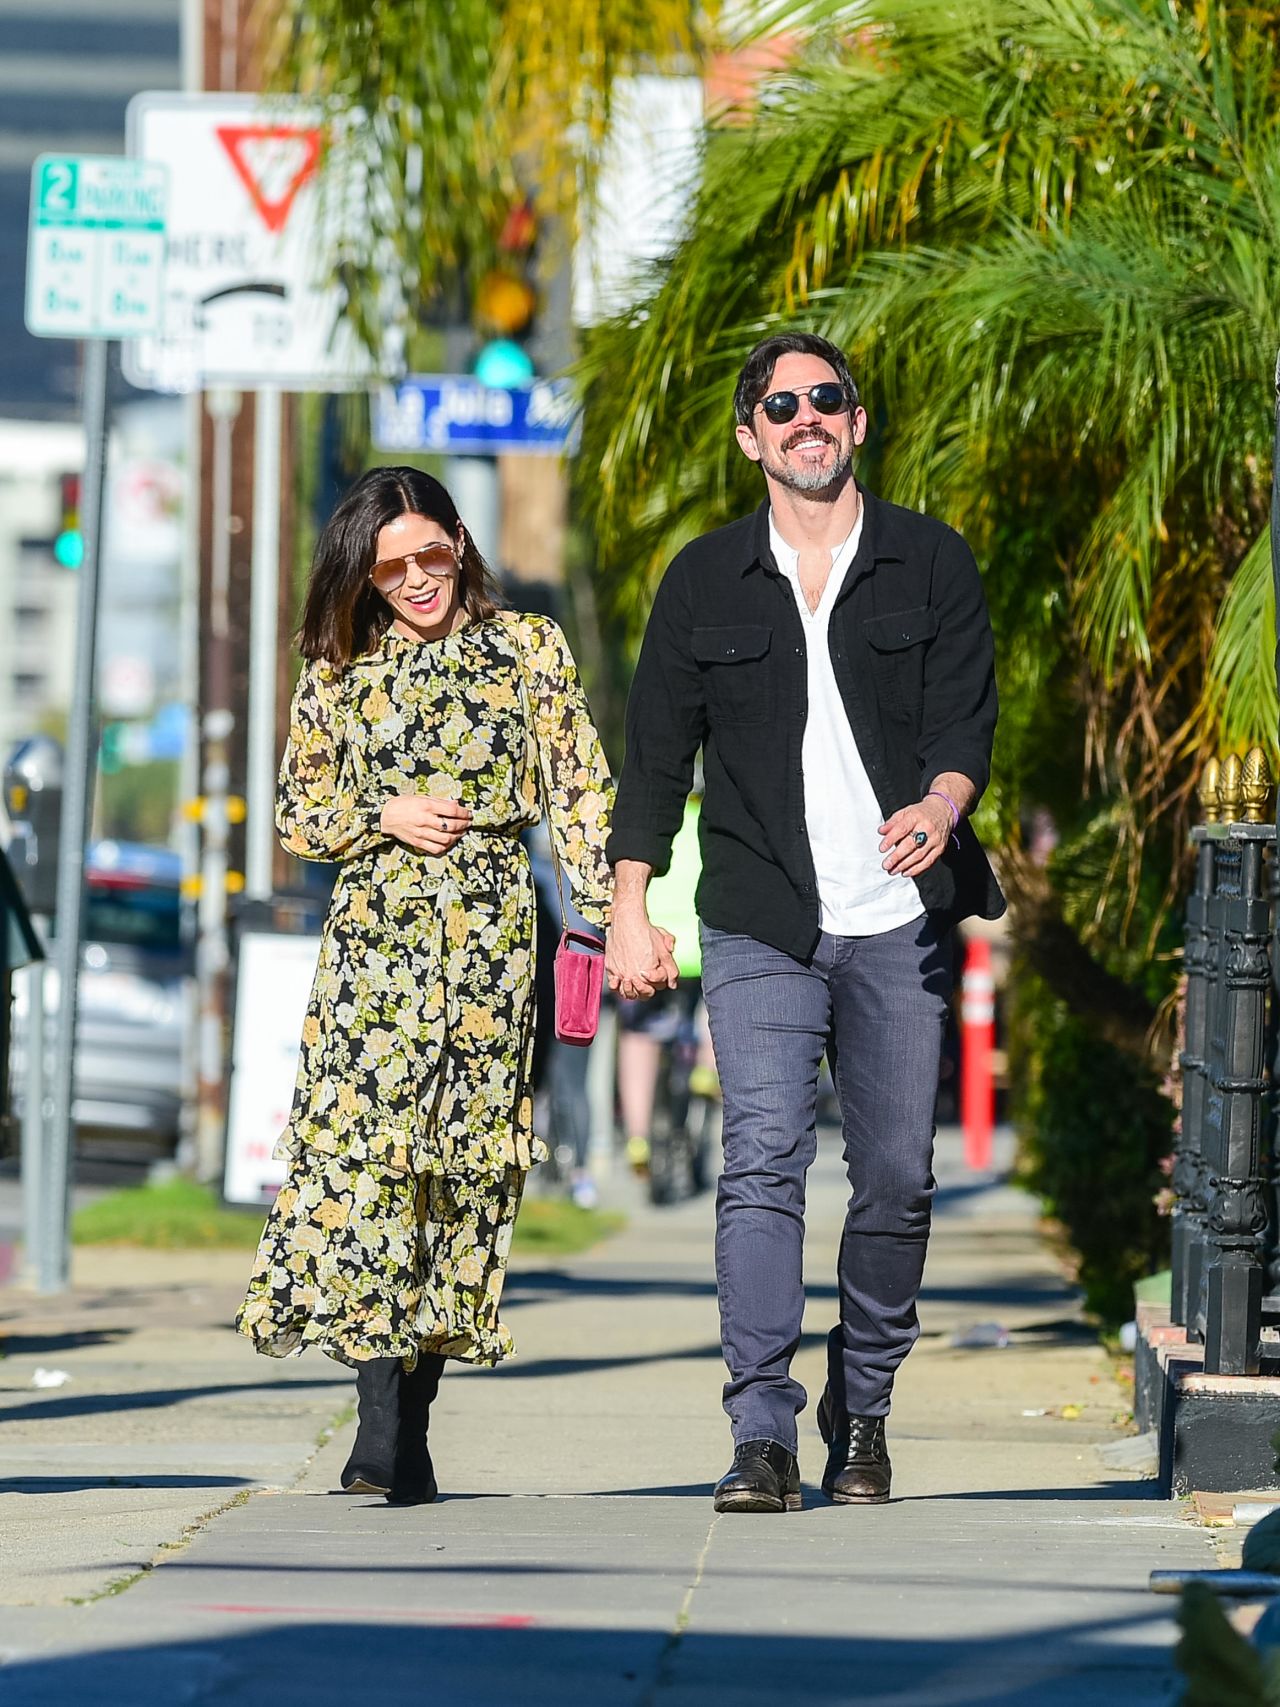 Jenna Dewan and boyfriend Steve Kazee <a href="https://www.cnn.com/2019/09/24/entertainment/jenna-dewan-steve-kazee-baby-trnd/index.html" target="_blank">announced in September </a>that they're expecting their first child together. Dewan shares a daughter, Everly, with ex-husband Channing Tatum.